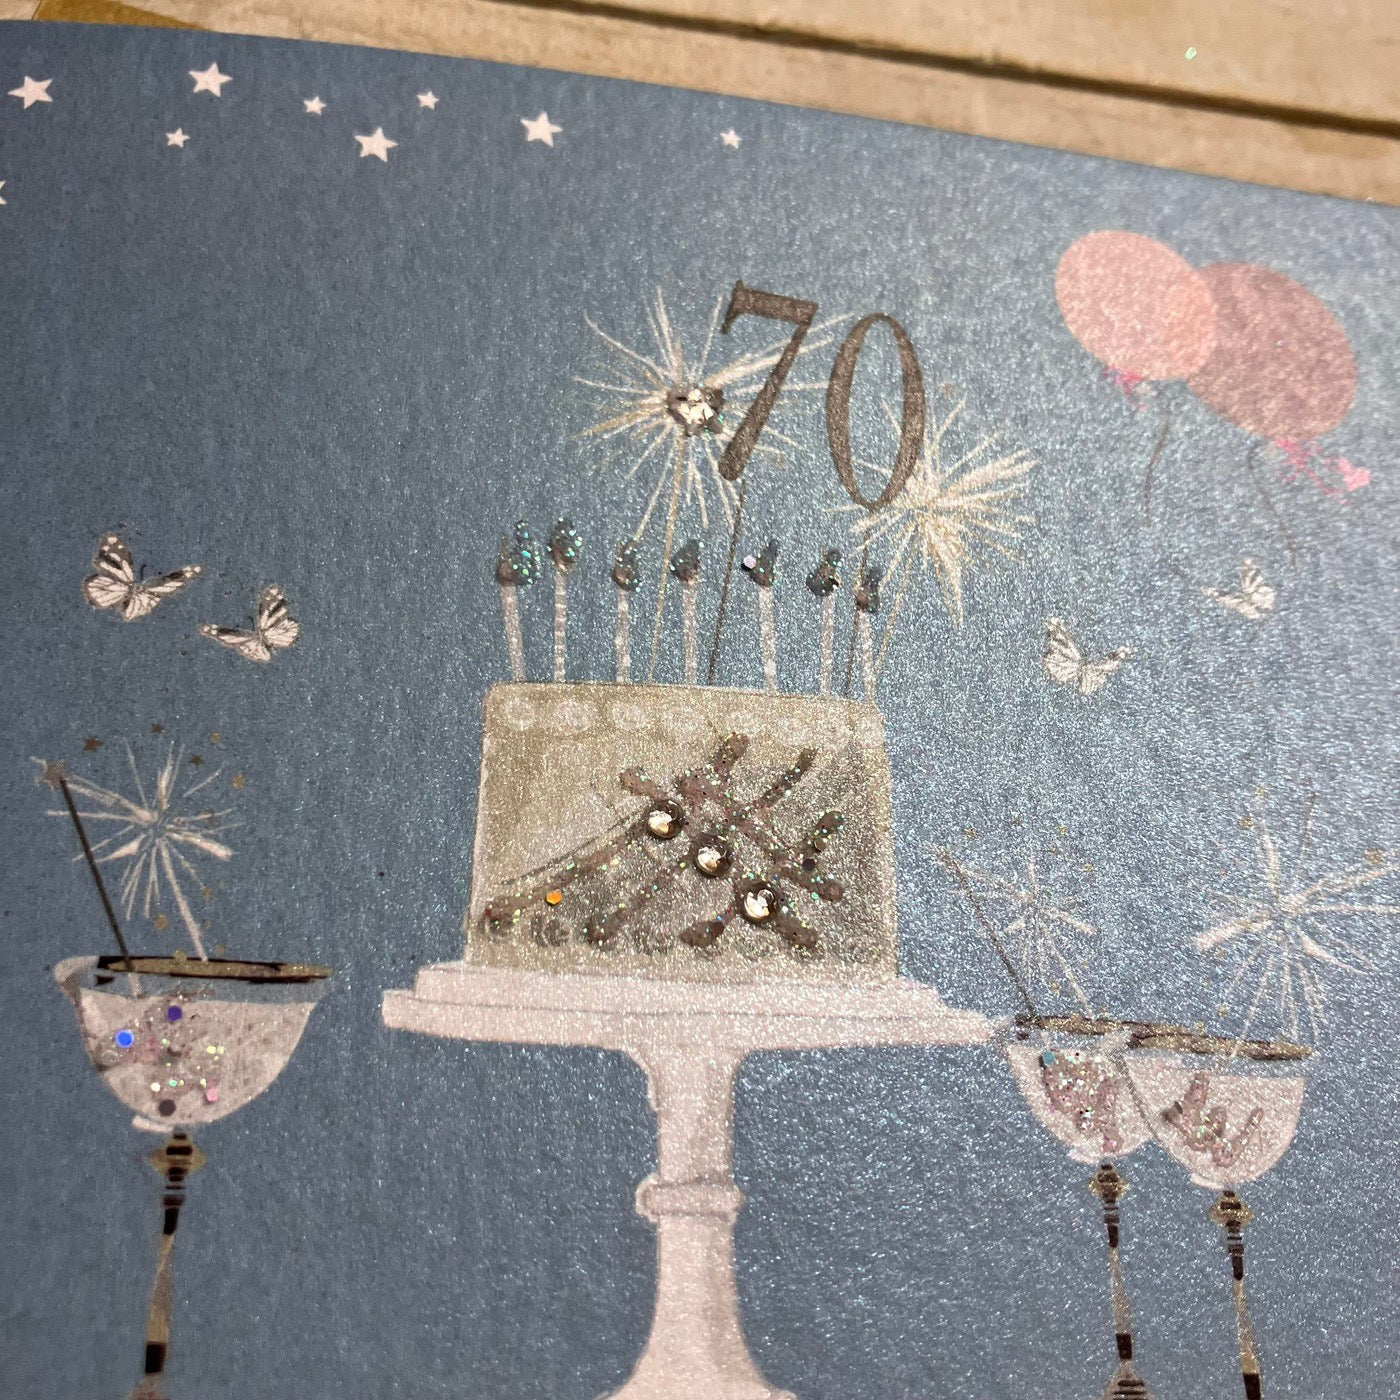 70th Birthday Teal Blue Sparkly Cake & Glasses Card - White Cotton Cards